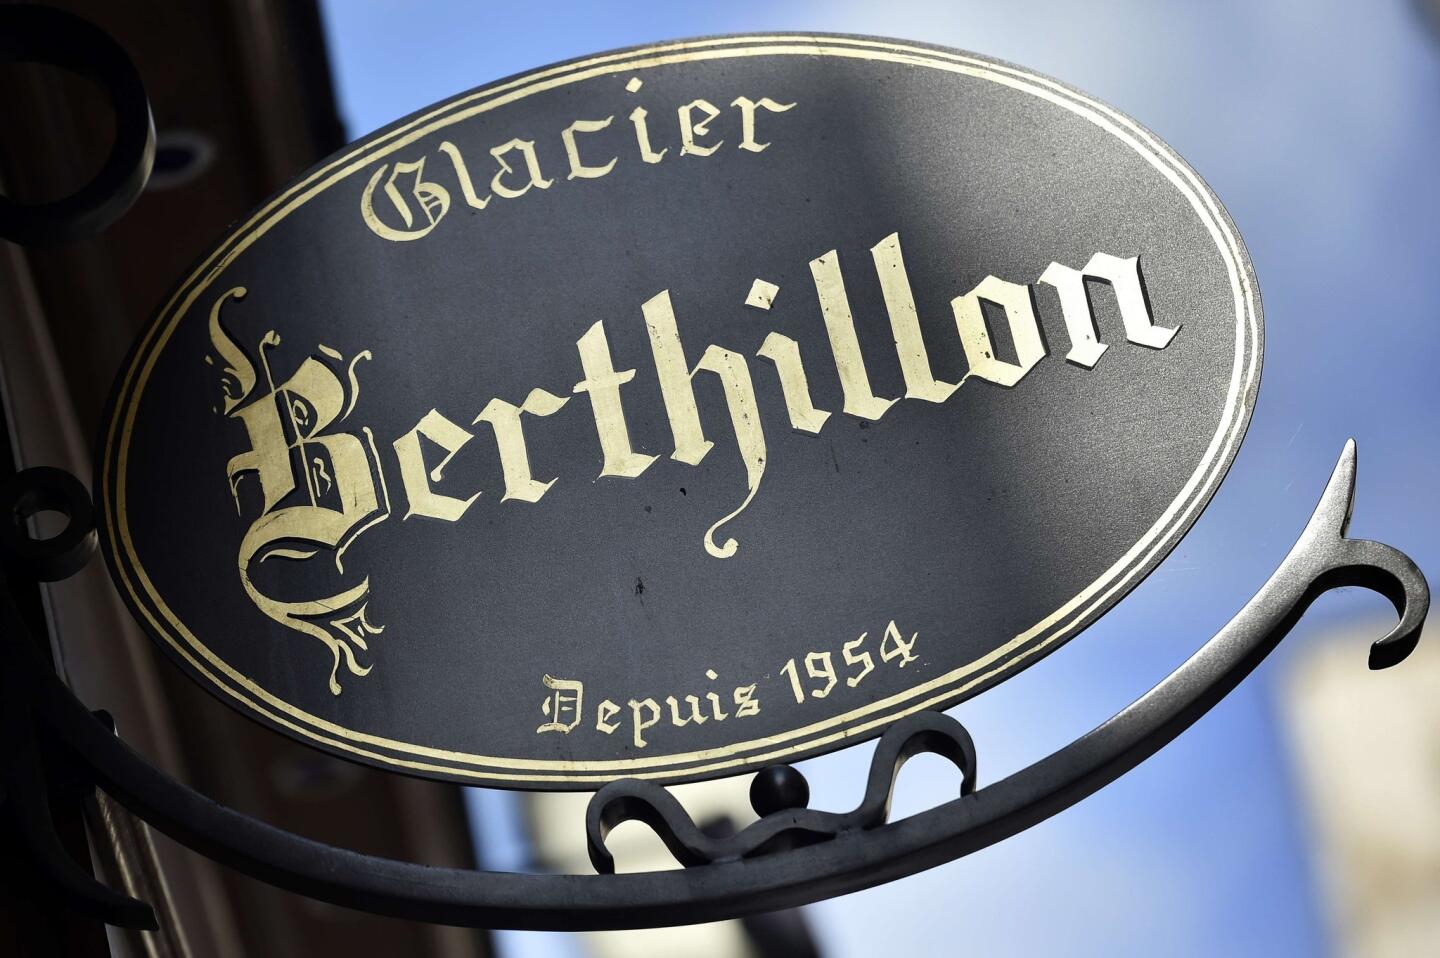 The Berthillon ice cream shop is run by three generations of the family. It first gained fame in 1961 when the food critics Henri Gault and Christian Millau wrote about "this astonishing ice cream shop hidden in a bistro on the Ile Saint-Louis."